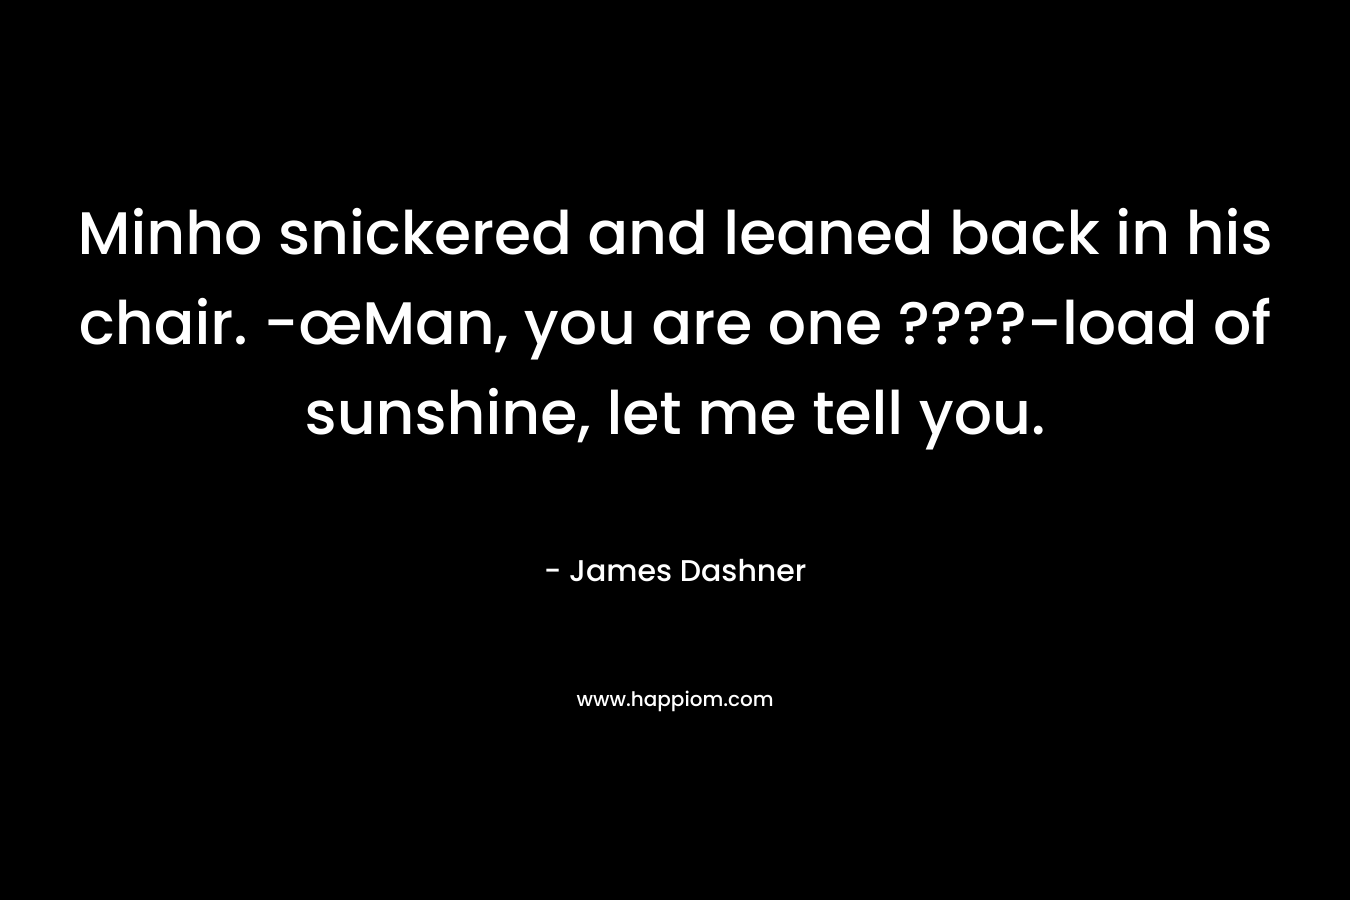 Minho snickered and leaned back in his chair. -œMan, you are one ????-load of sunshine, let me tell you. – James Dashner